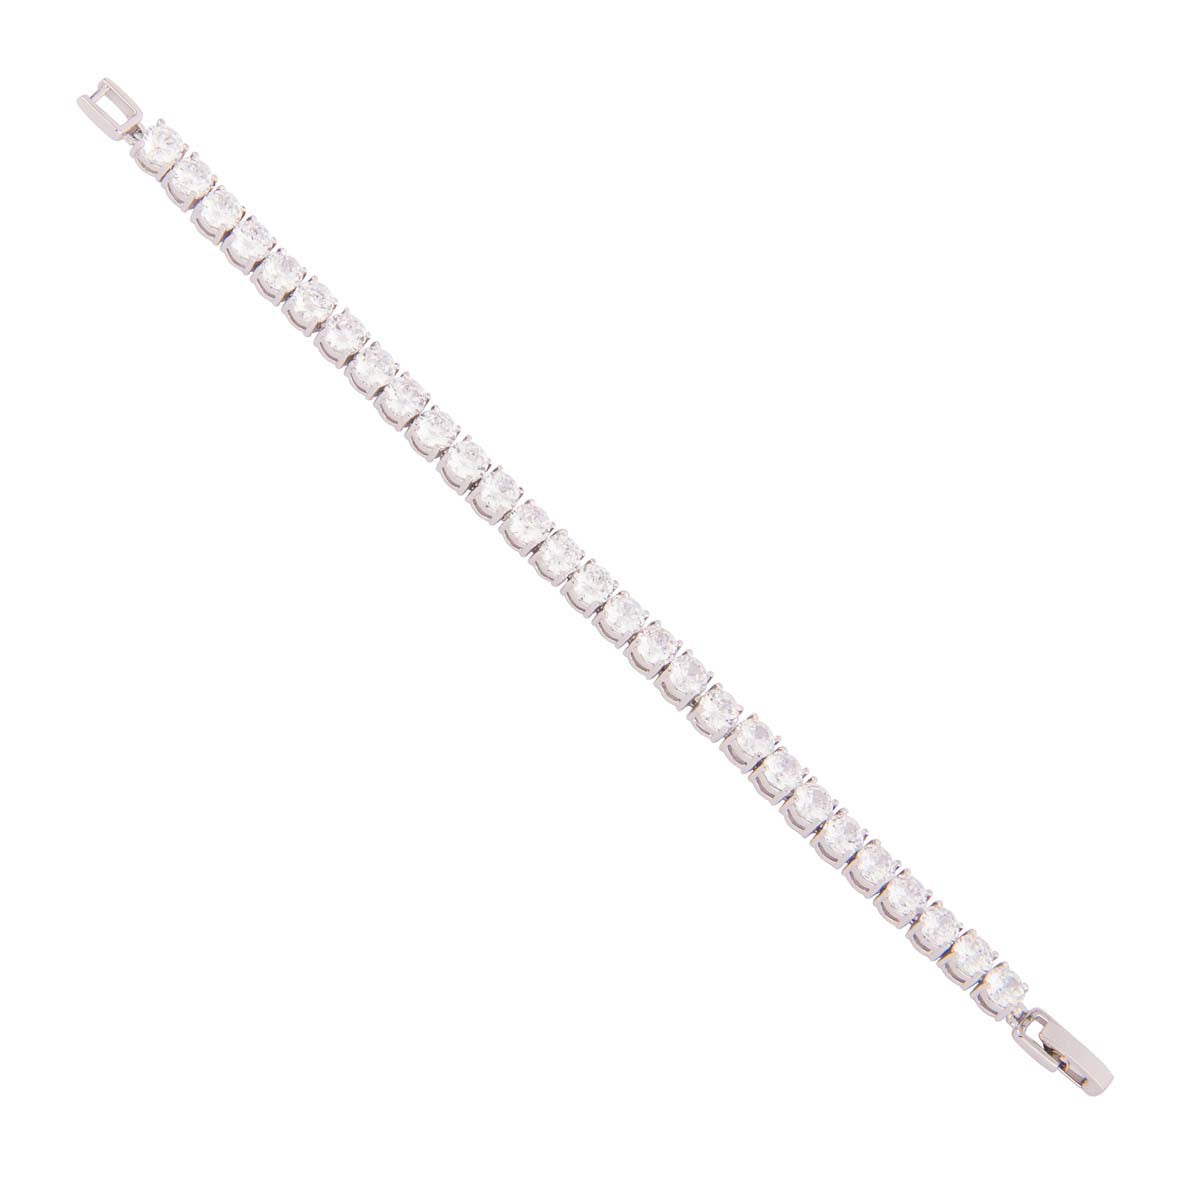 This single line bracelet of large crystals is the vision of all your dreams aligned in perfect harmony. The piece is set in mixed metal alloy with a silver finish.